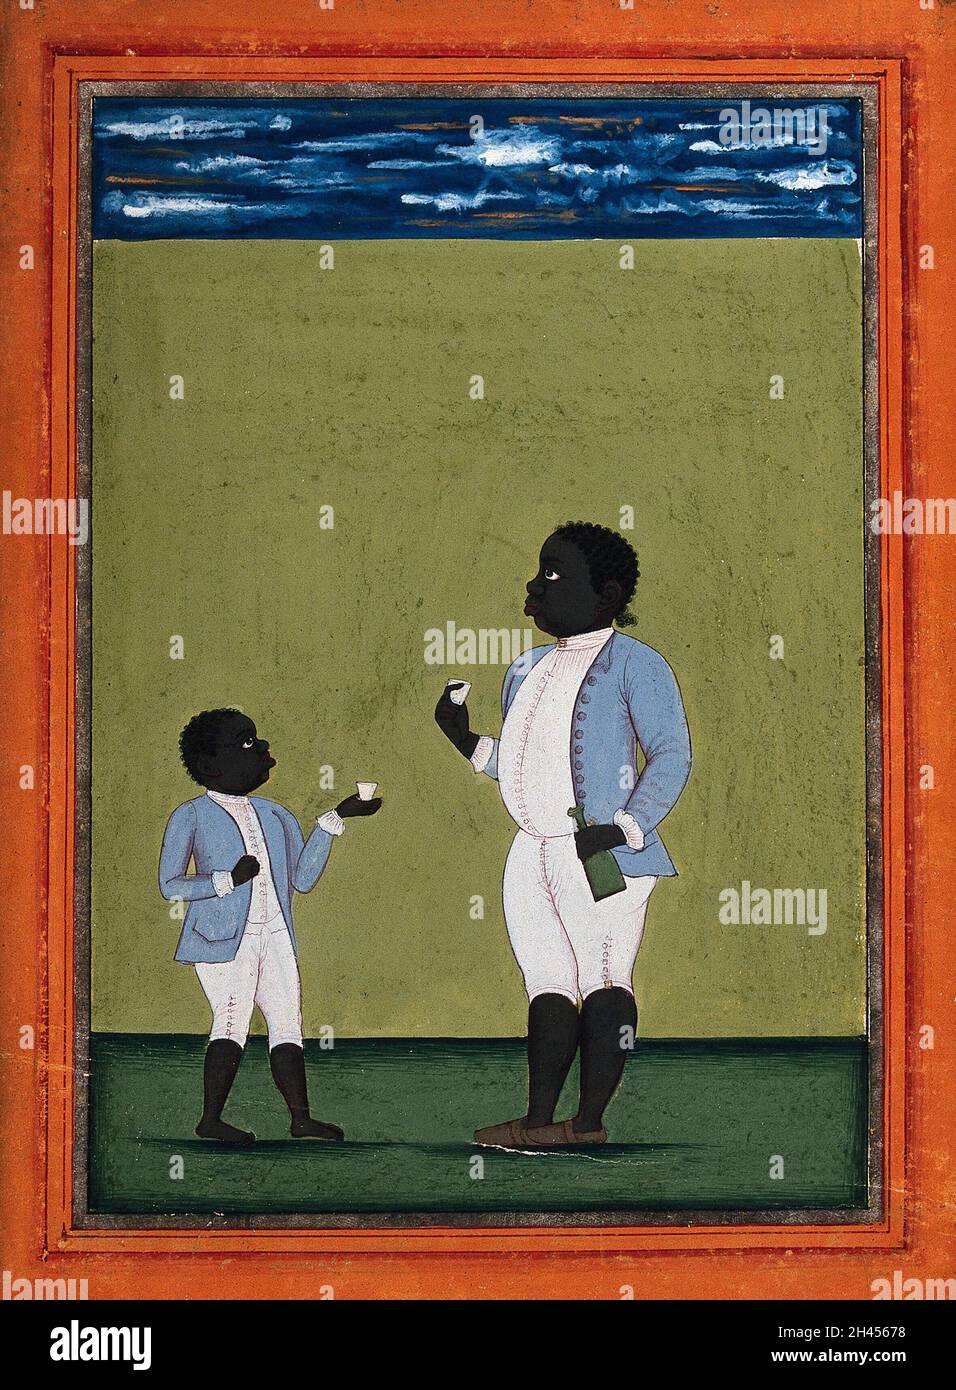 Two black domestic servants in European dress. Gouache painting by an Indian artist. Stock Photo